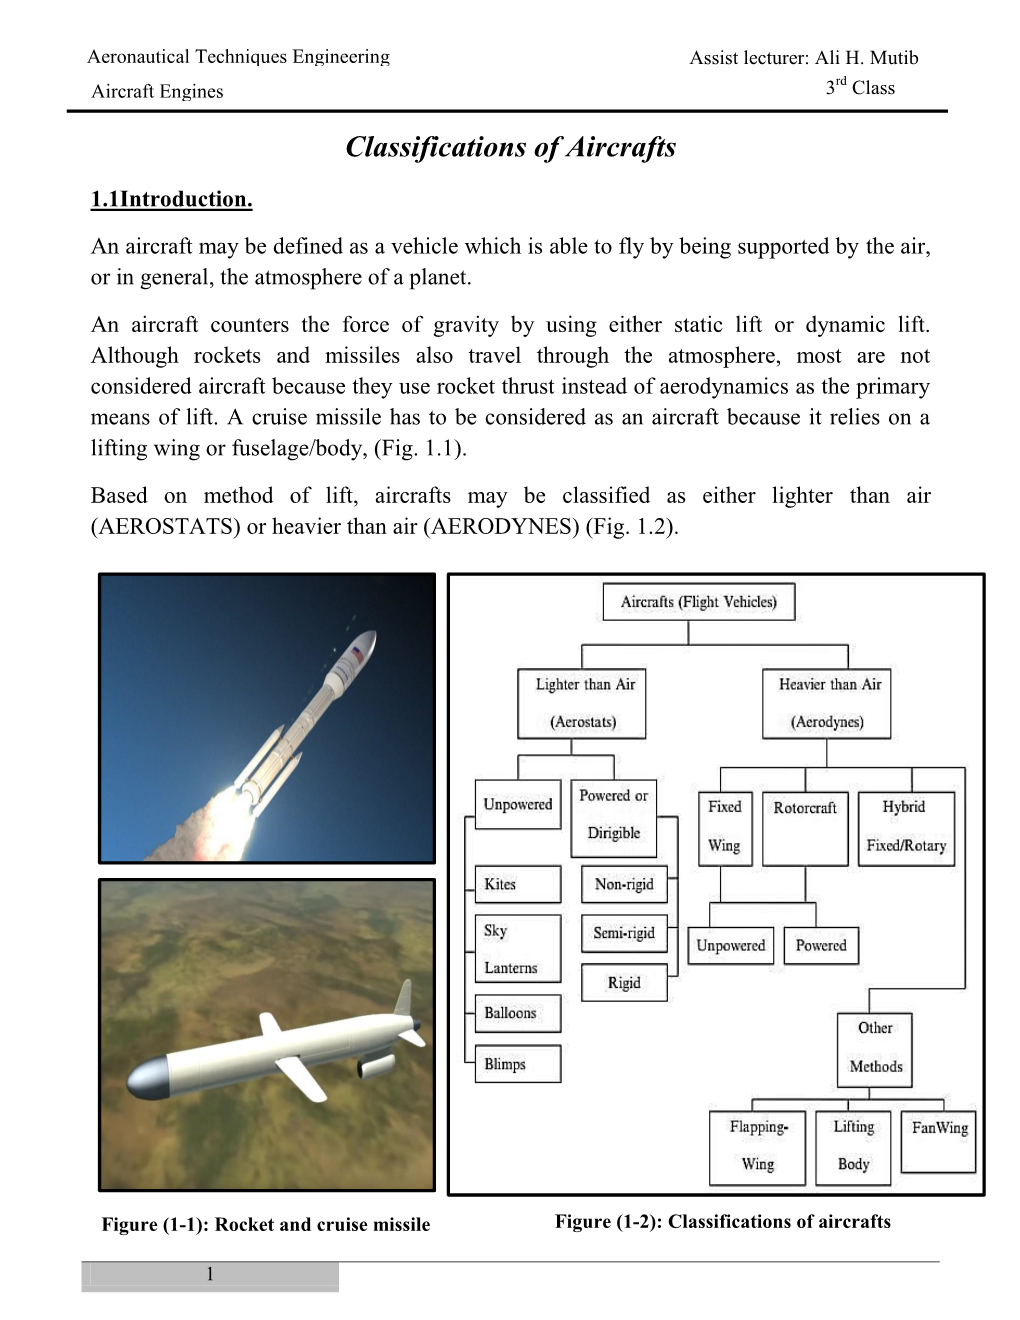 Classifications of Aircrafts